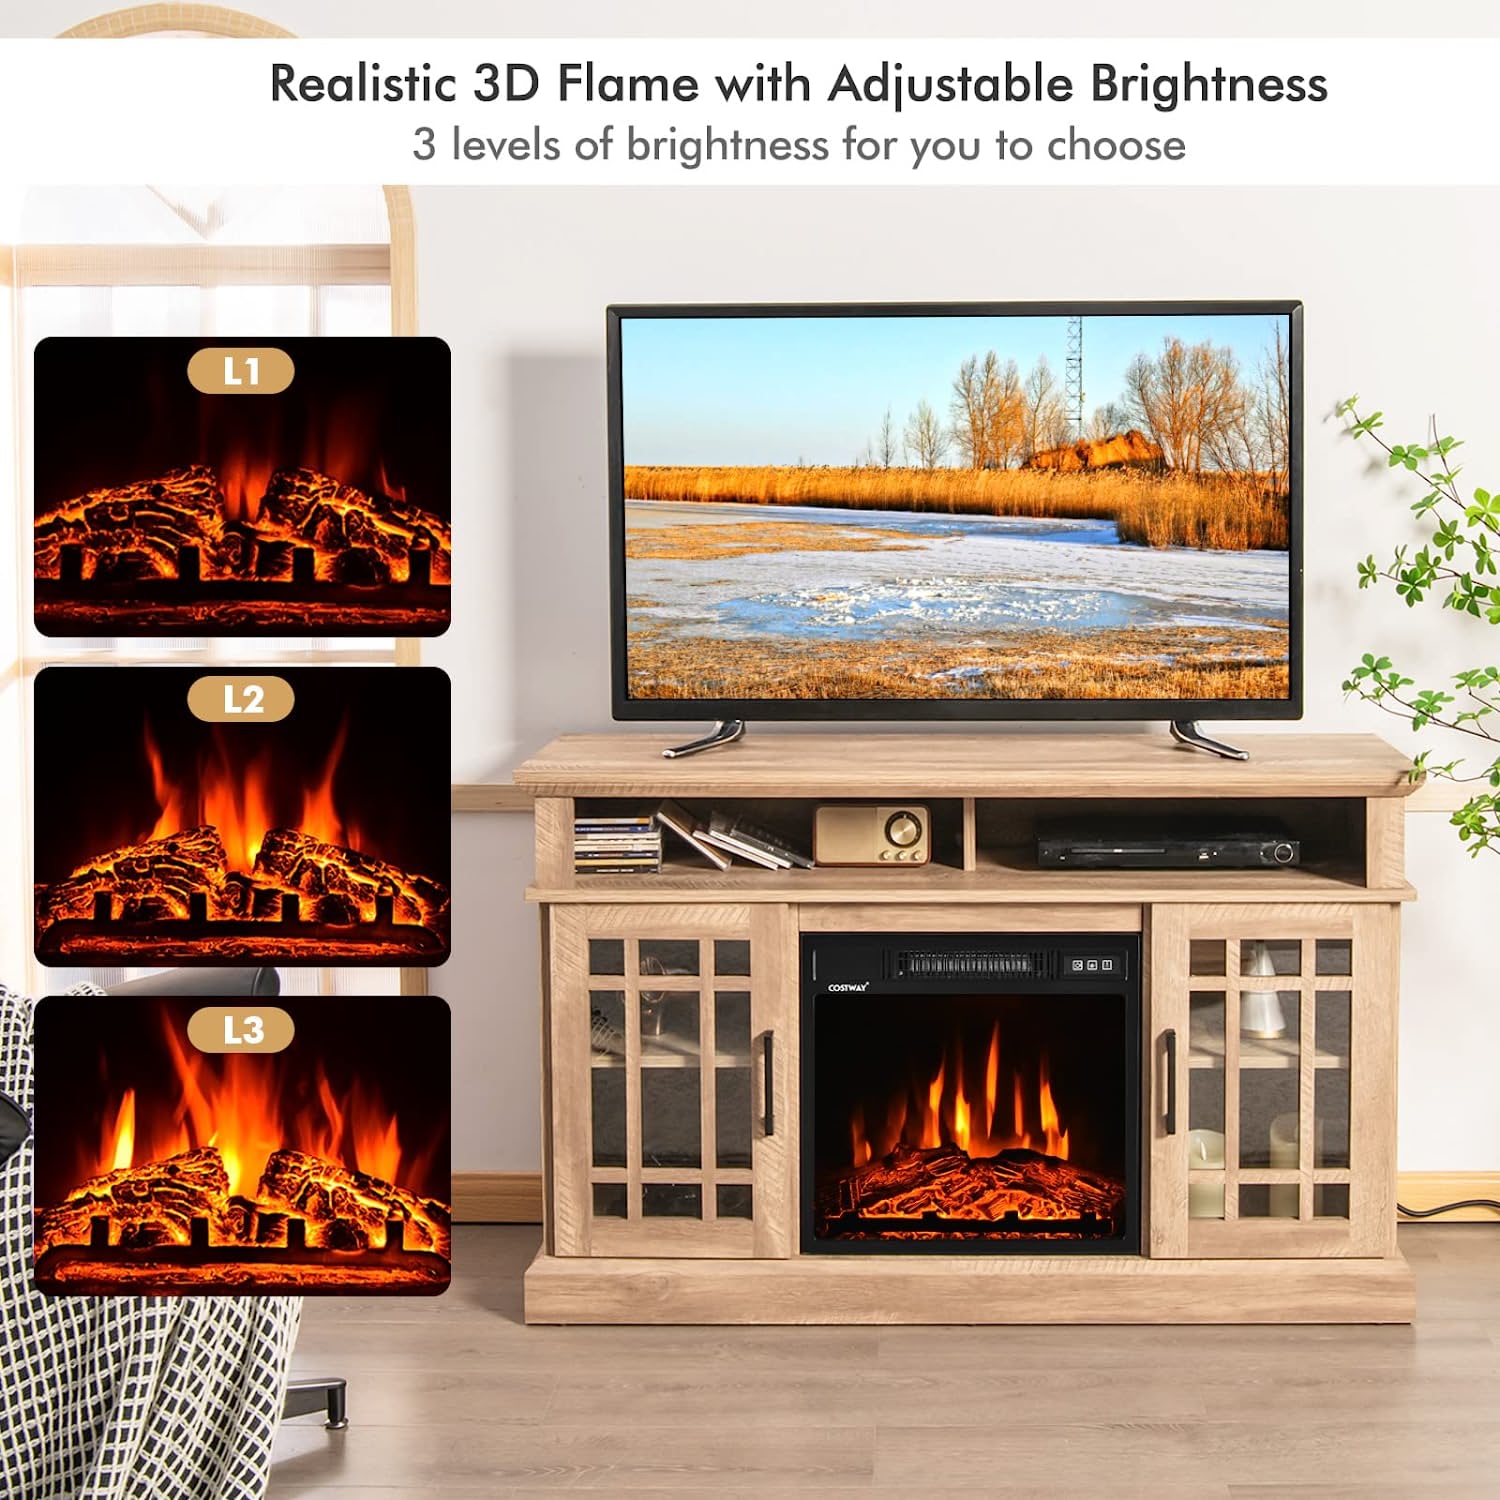 Chairliving 48 Inch Wooden TV Stand Console Table with 1400W Electric Fireplace and Open Storage